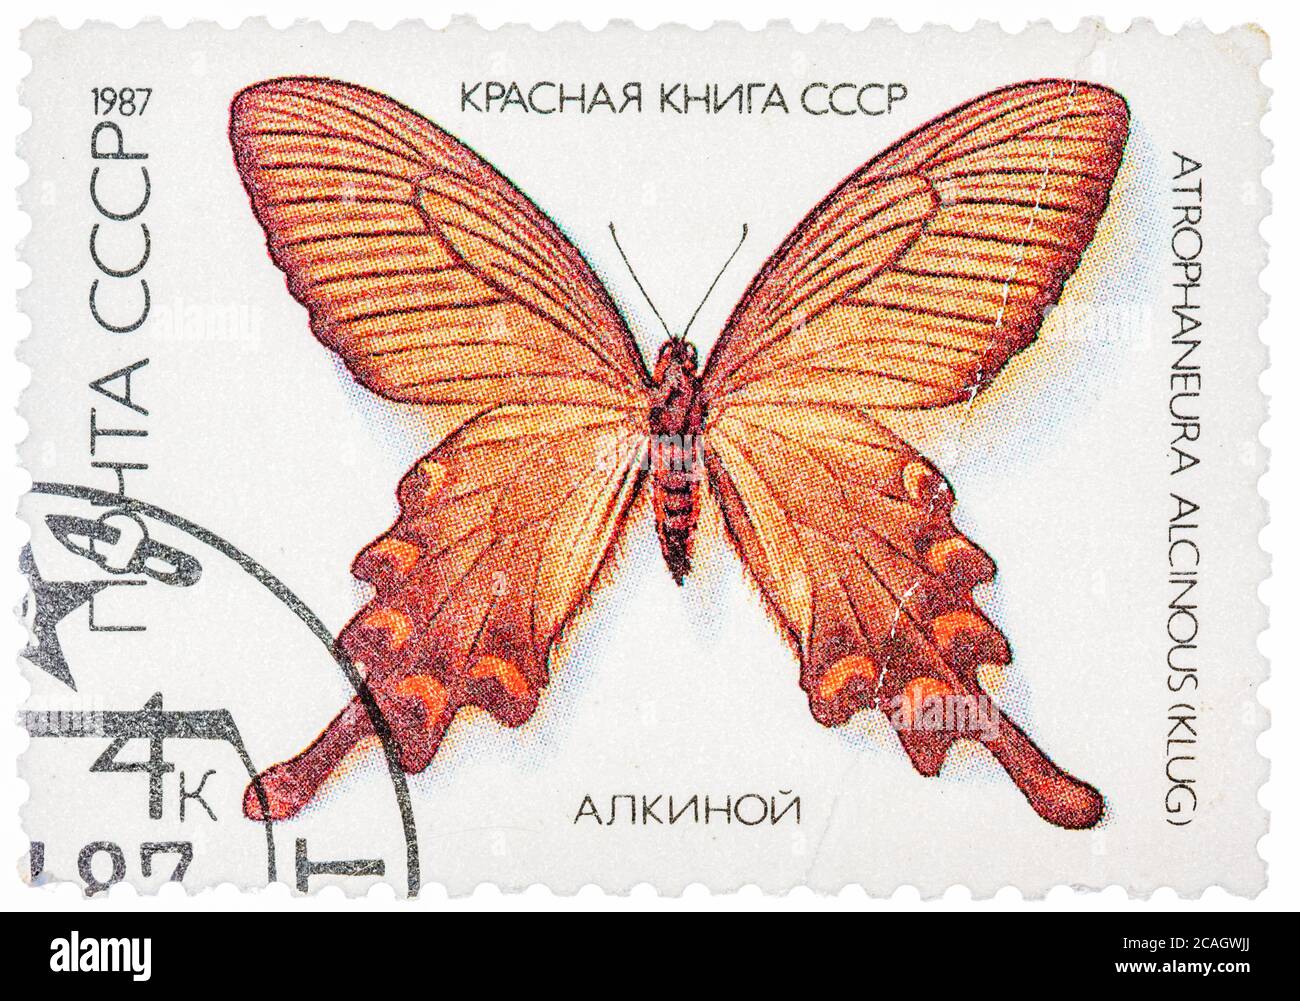 Stamp printed in the USSR shows butterfly Alcinous, series Stock Photo